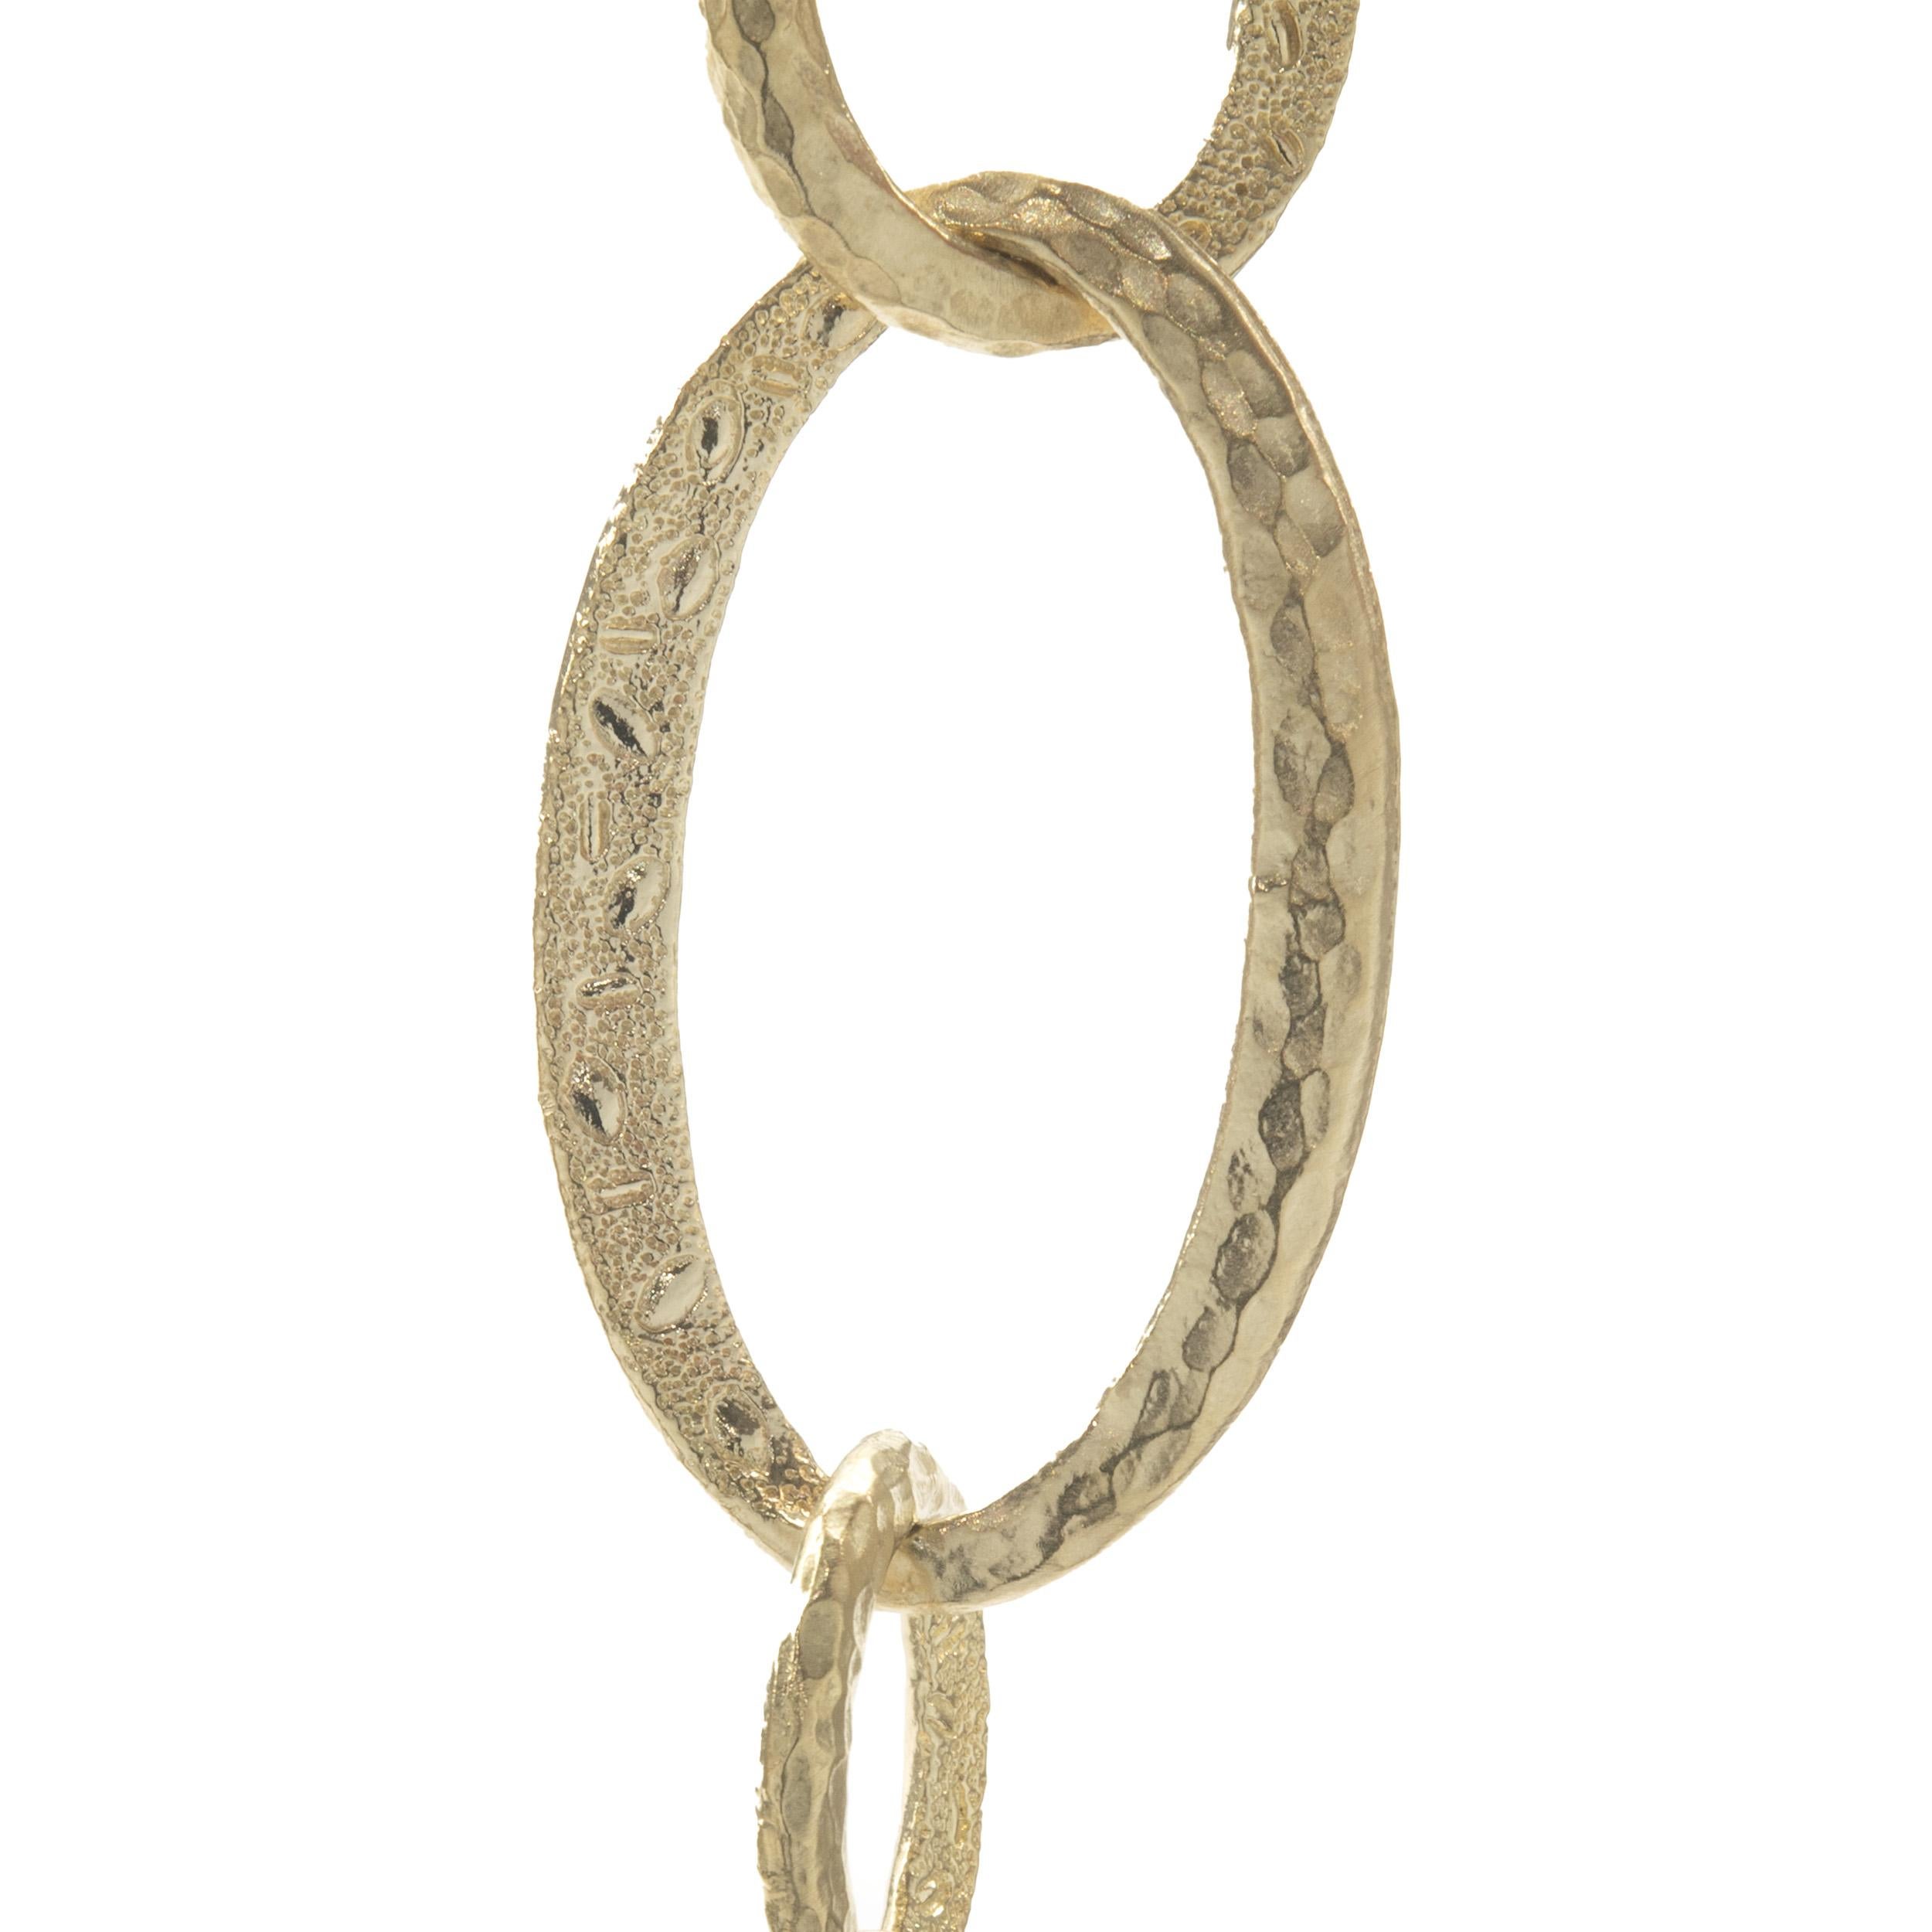 Material: 18K yellow gold
Dimensions: necklace measures 24-inches in length
Weight: 70.77 grams
